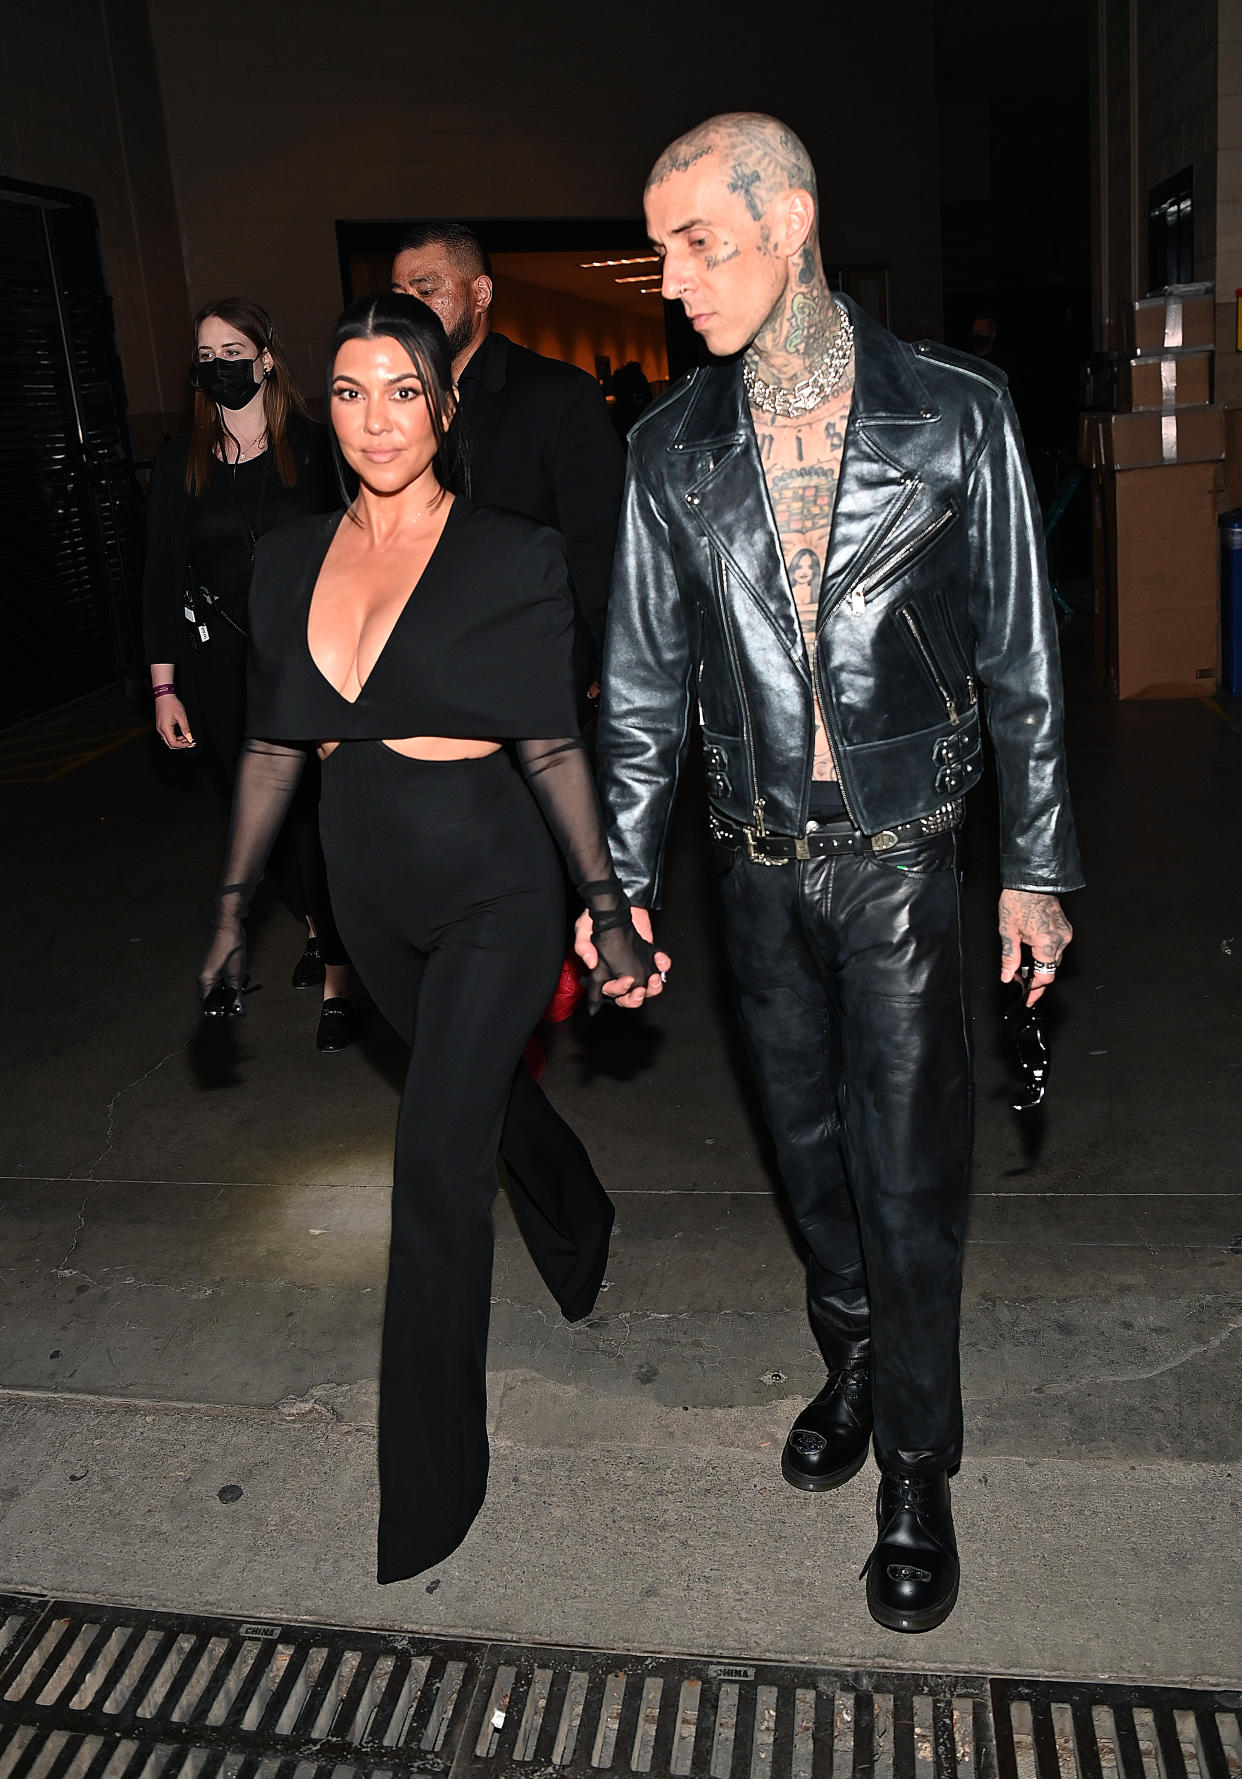 LAS VEGAS, NEVADA - APRIL 03: (L-R) Kourtney Kardashian and Travis Barker attend the 64th Annual GRAMMY Awards at MGM Grand Garden Arena on April 03, 2022 in Las Vegas, Nevada. (Photo by Denise Truscello/Getty Images for The Recording Academy)